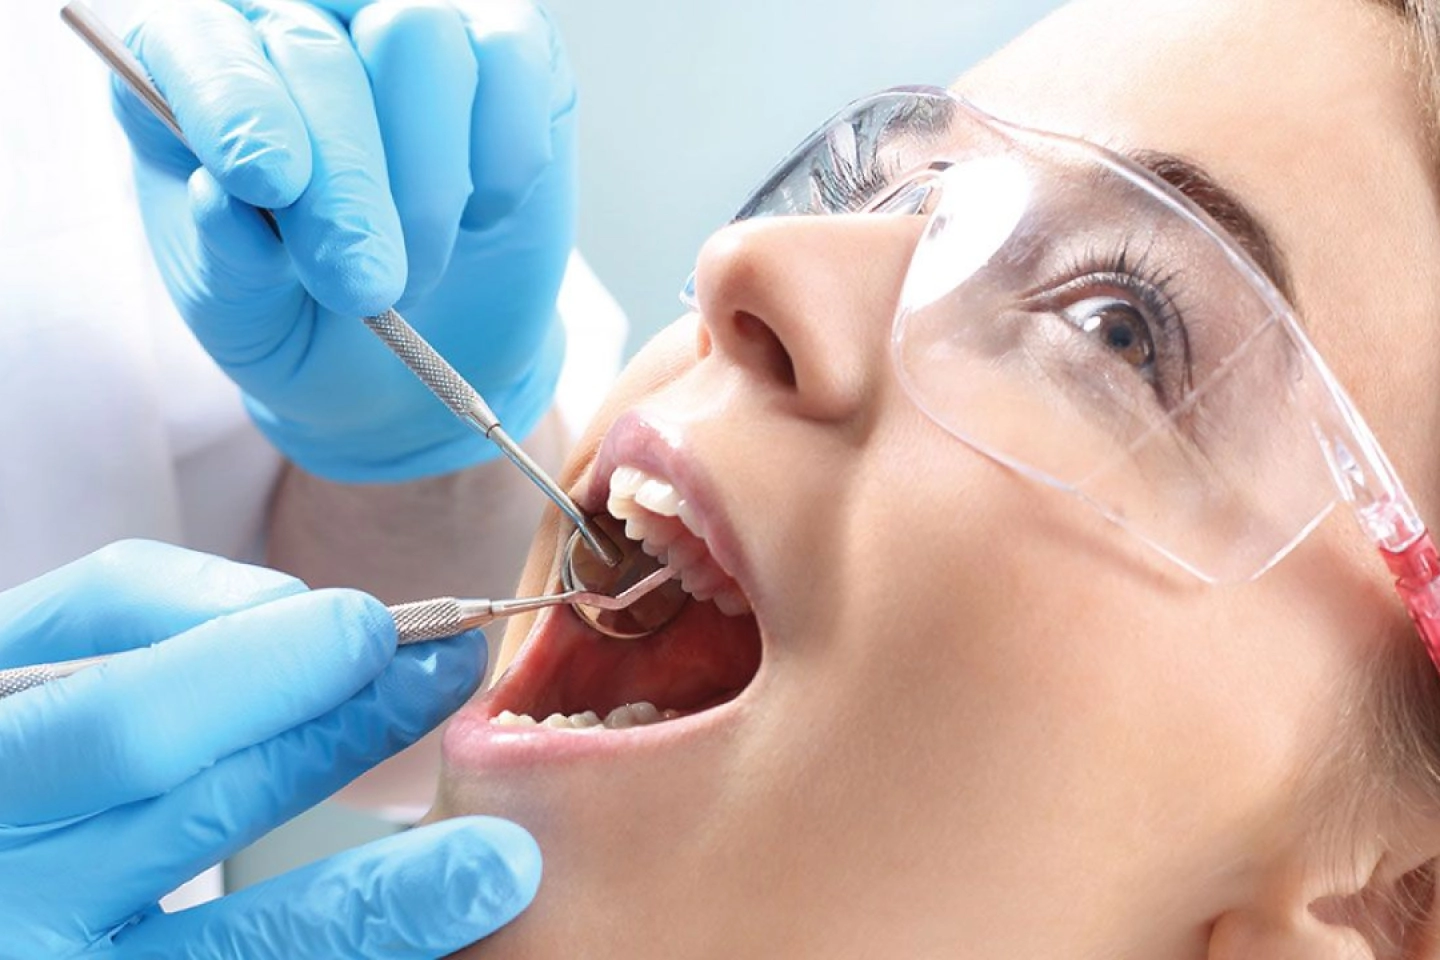 Relieve Pain with Root Canal Therapy at IM Dentistry.